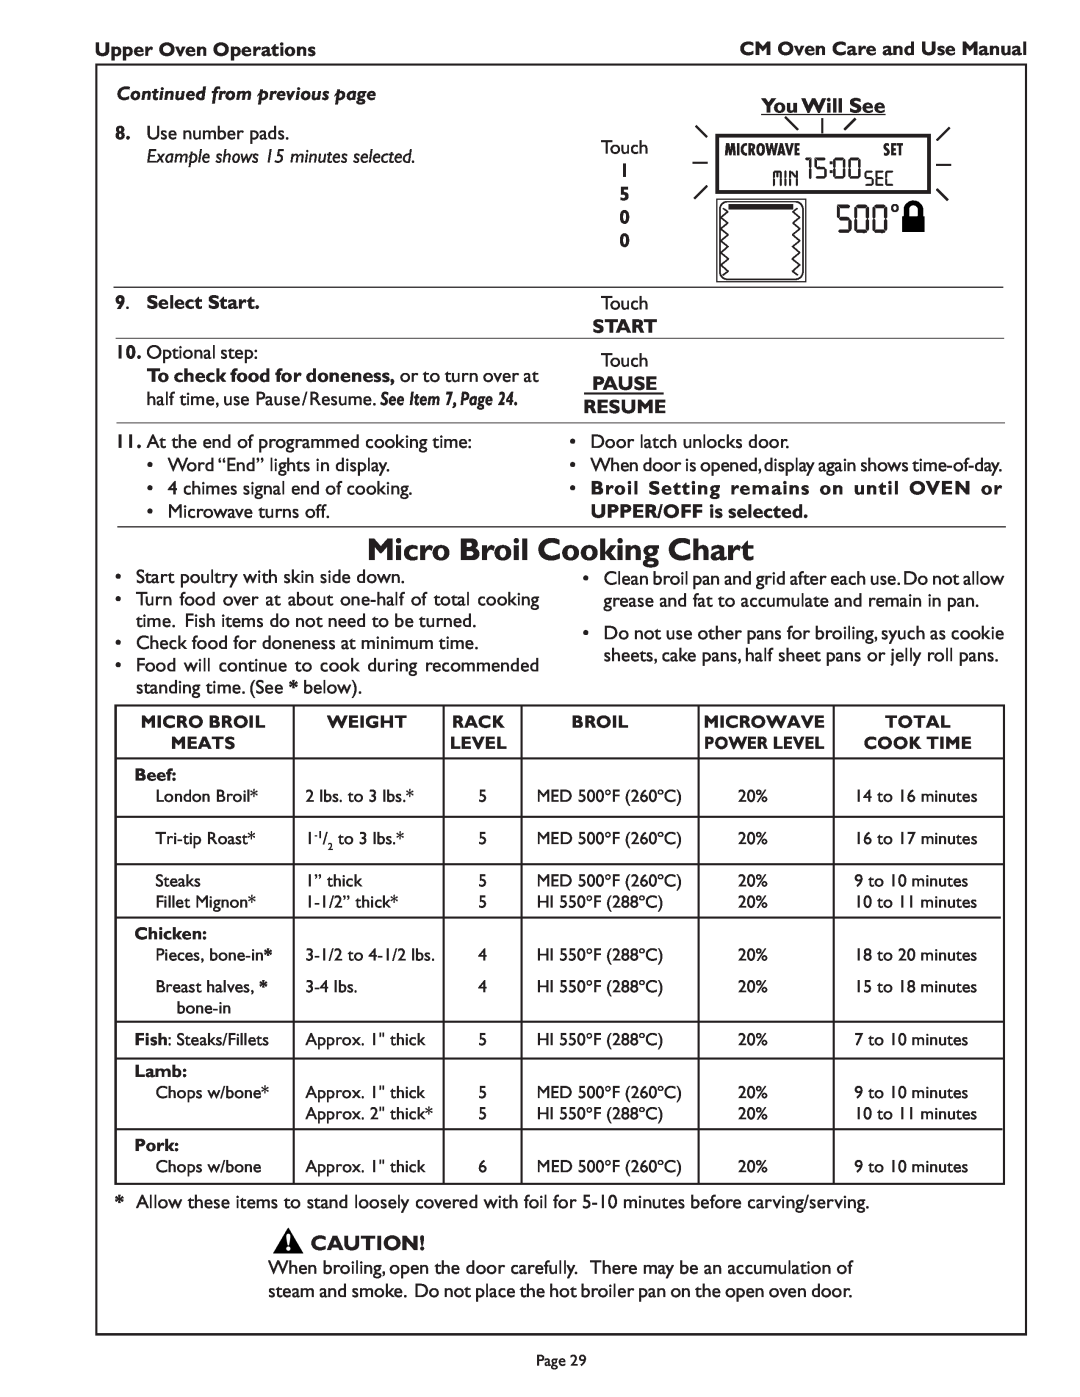 Thermador CM302 manual Micro Broil Cooking Chart, min 1500sec, You Will See, Continued from previous page 